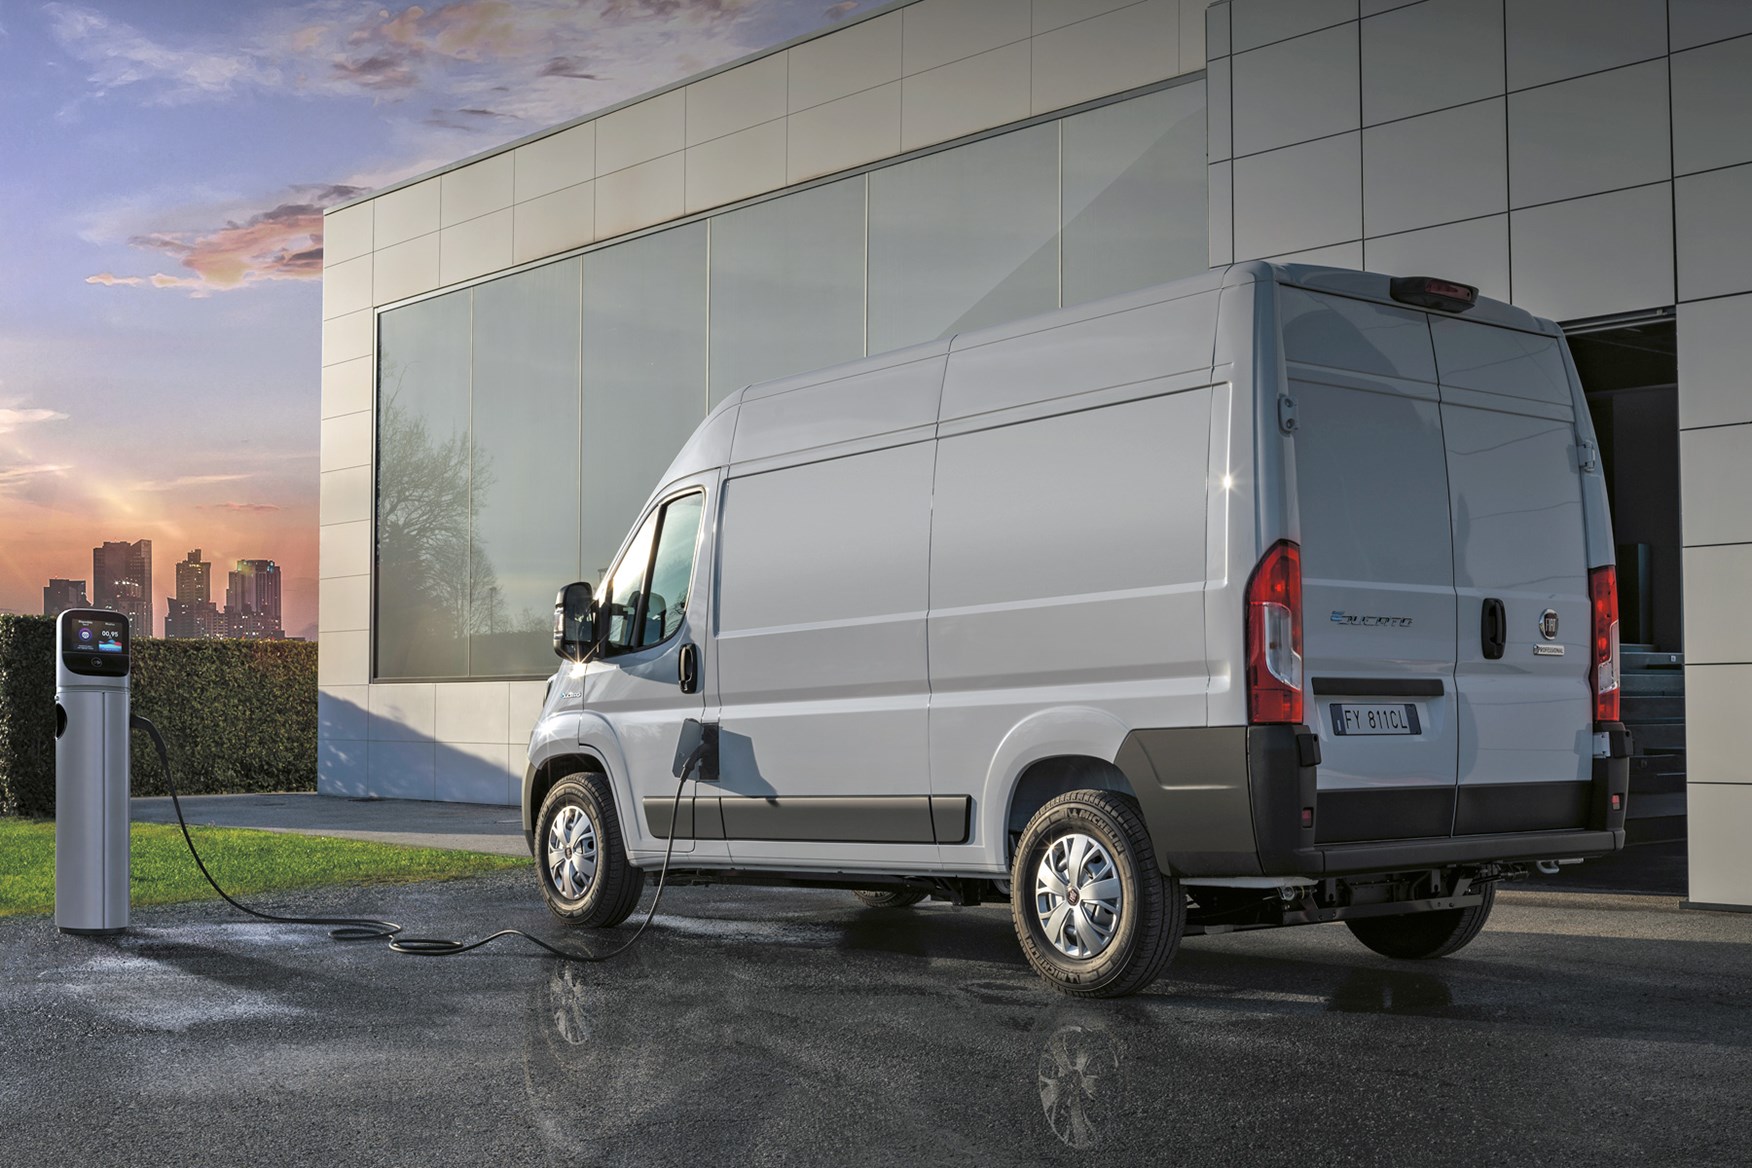 More than a third of van drivers considering an electric van